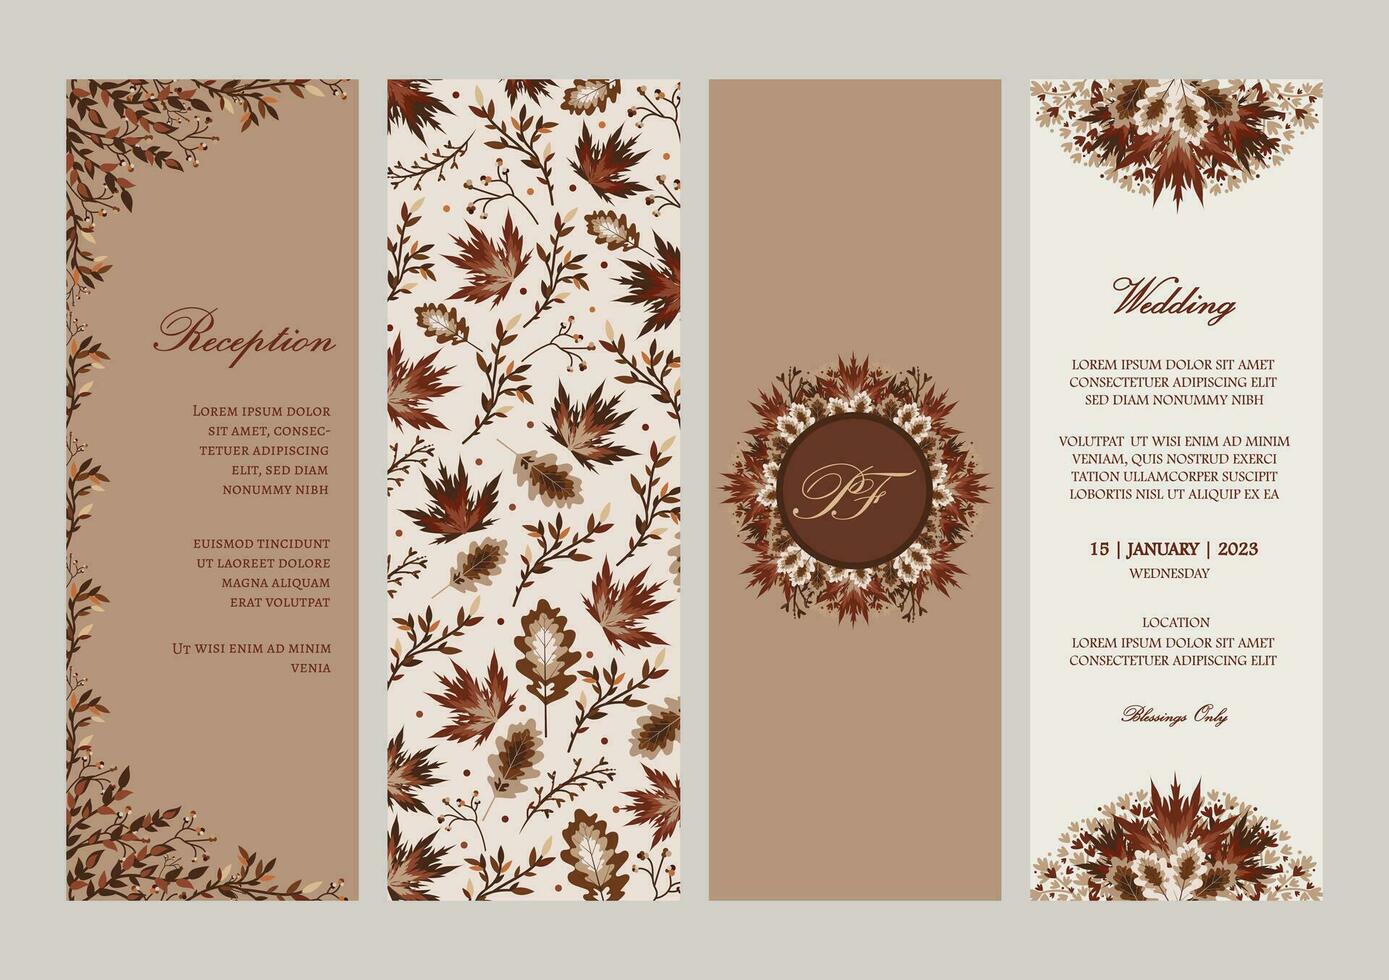 Vector ornate Wedding Invitation Cards in Fall colors. Set of 4 Fall themed Invitation Card template with floral ornaments and place for texts.